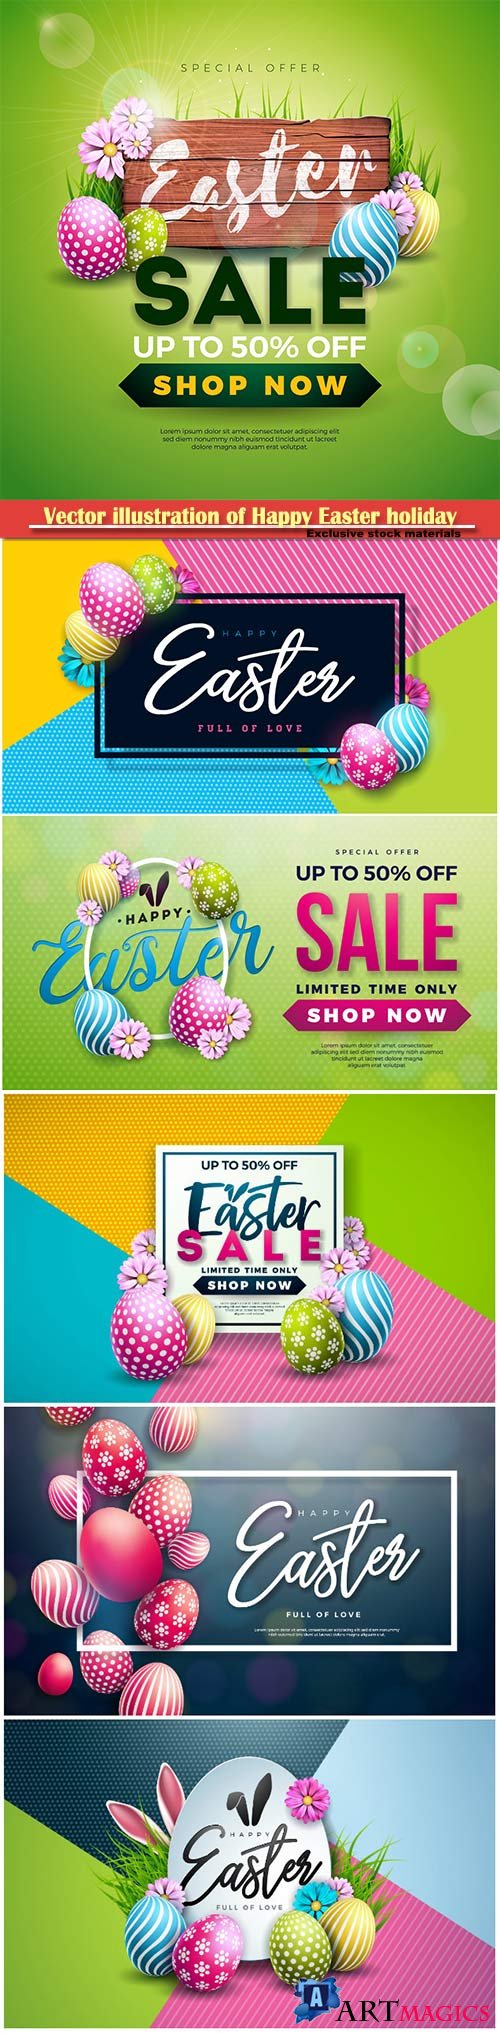 Vector illustration of Happy Easter holiday with egg and spring flower